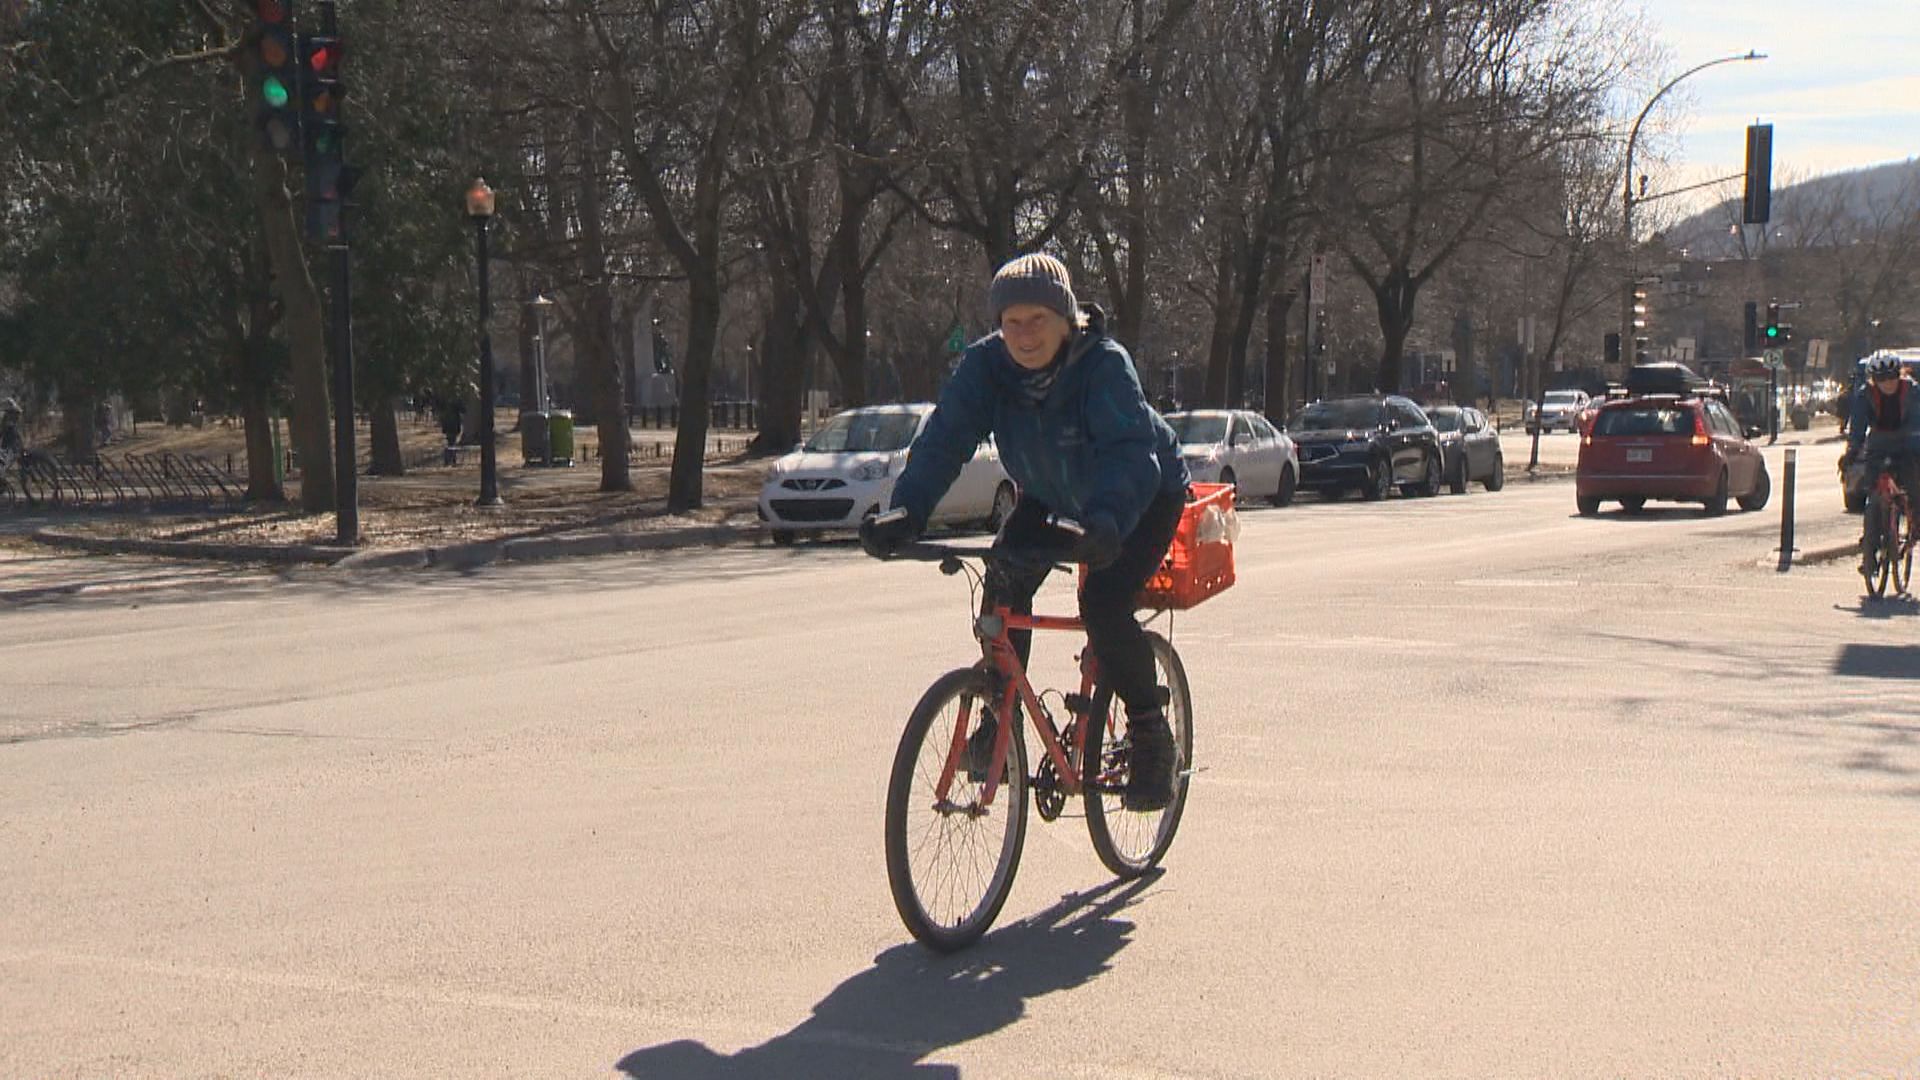 Warm temperatures drive Montrealers to adopt early cycling season